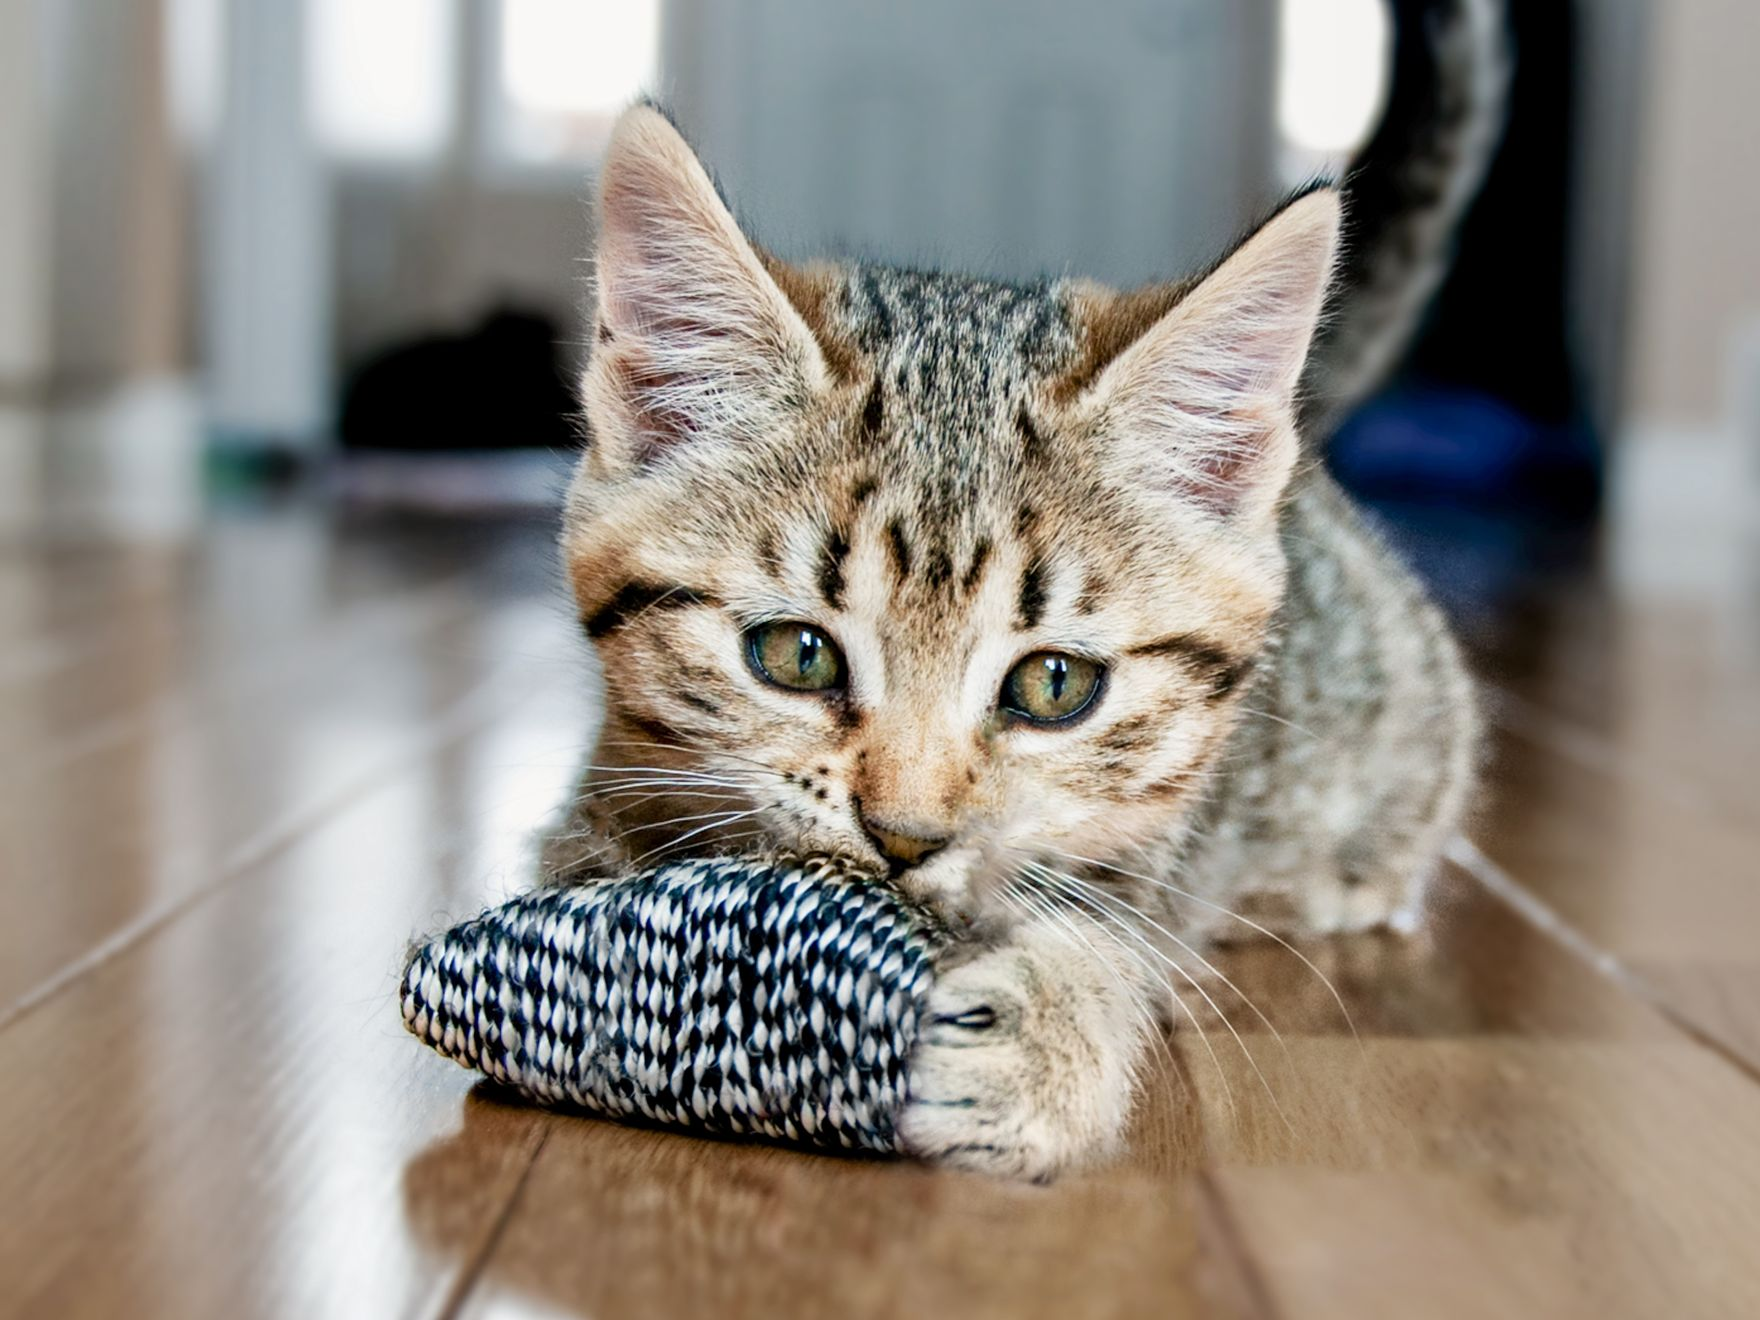 Kitten lying down on a wooden floor playing with a toy